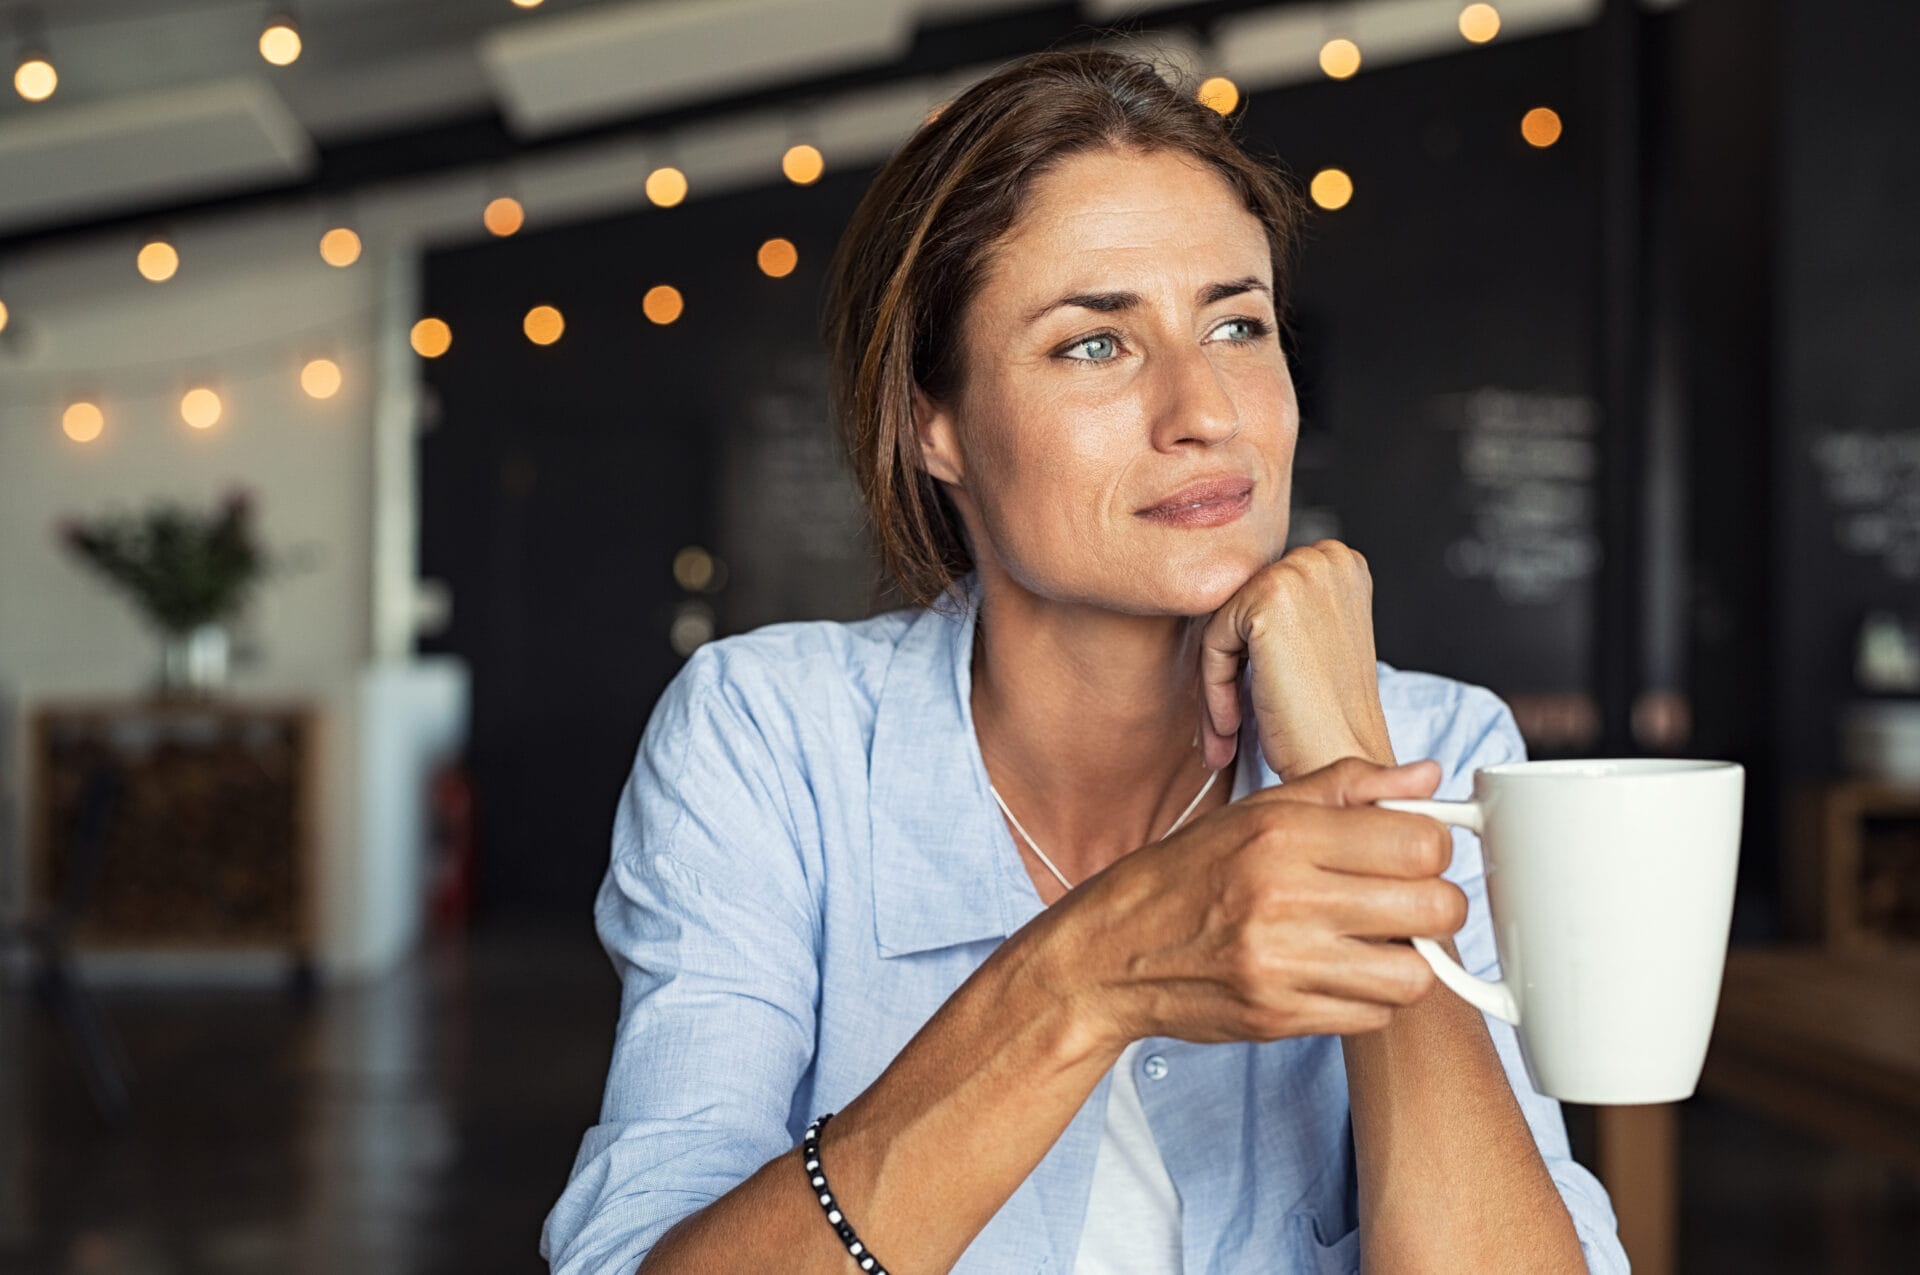 How to Find Your Passion and Purpose - Thoughtful mature woman sitting in cafeteria holding coffee mug while looking away. Middle aged woman drinking tea while thinking. Relaxing and thinking while drinking coffee.